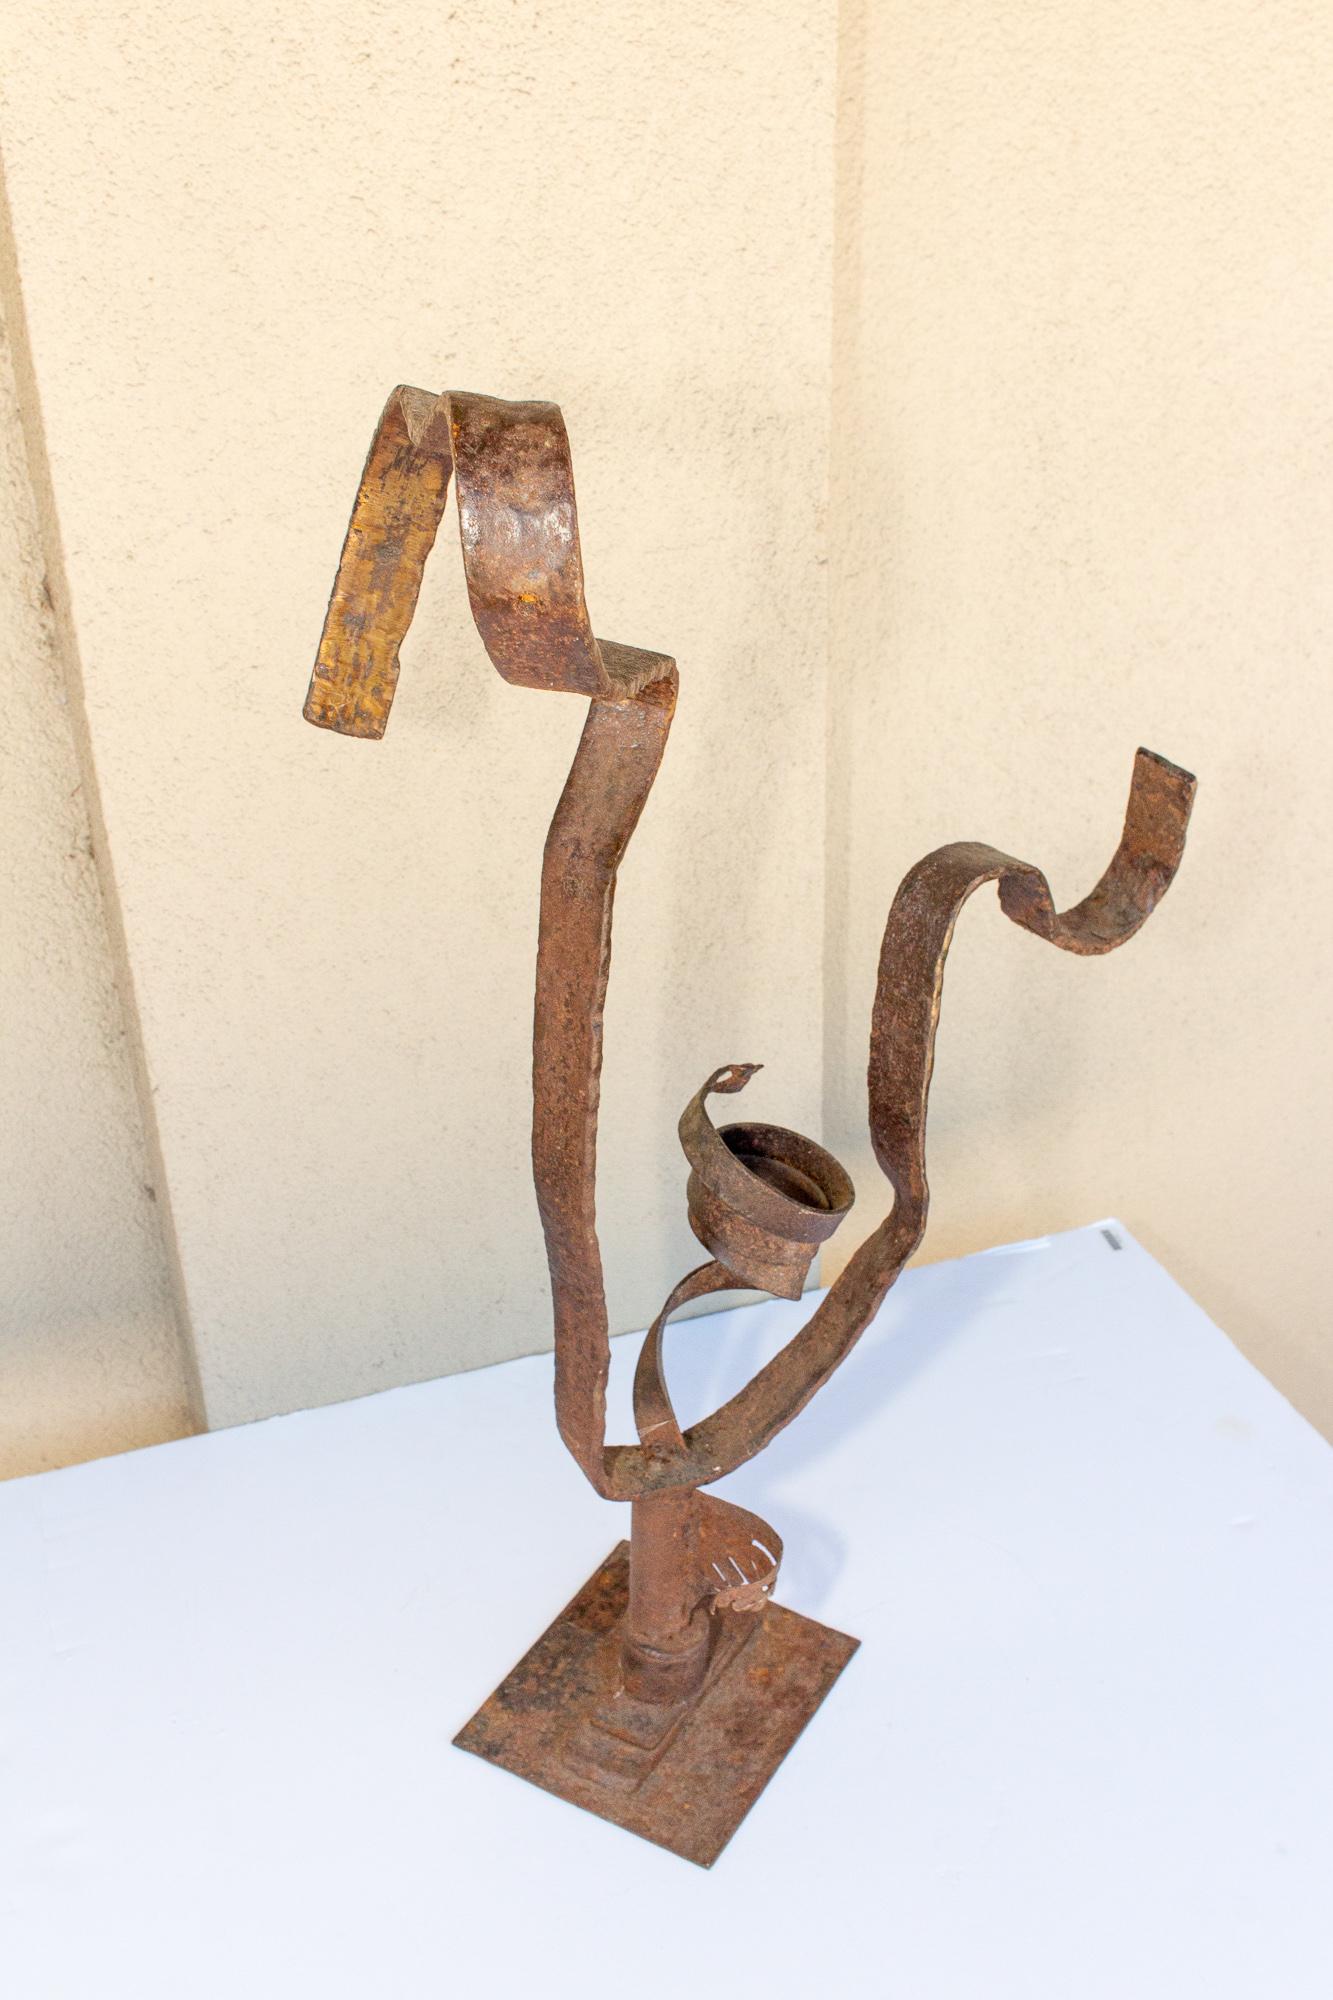 20th Century Midcentury Abstract Iron Sculpture found in France